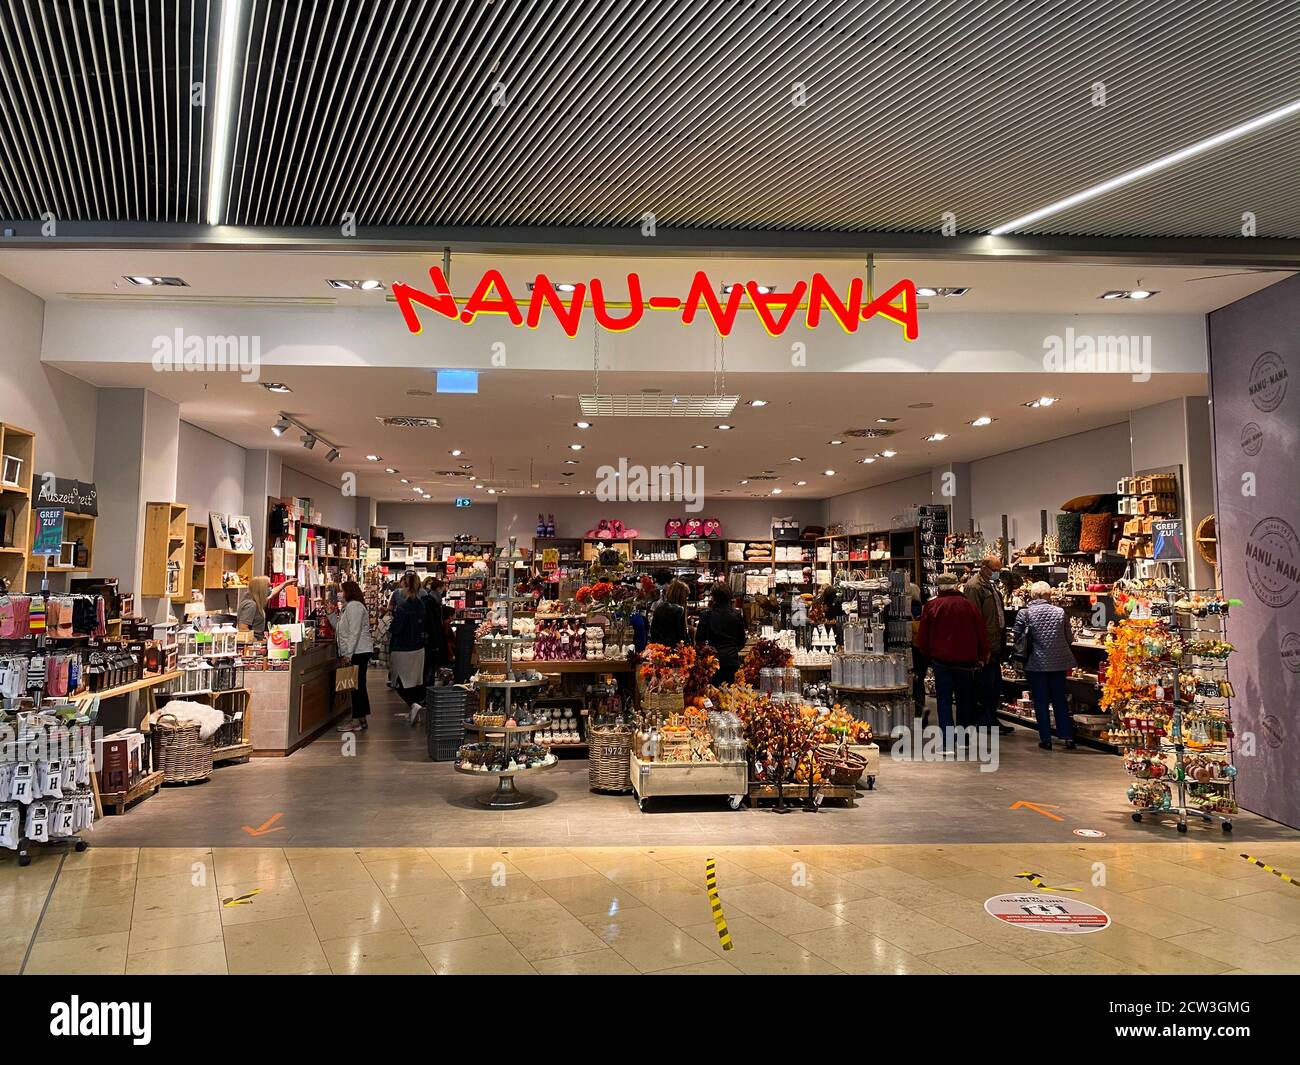 Monchengladbach, Germany - September 9. 2020: View on store front of Nanu-Nana gift articles company in german shopping mall (focus on lettering) Stock Photo